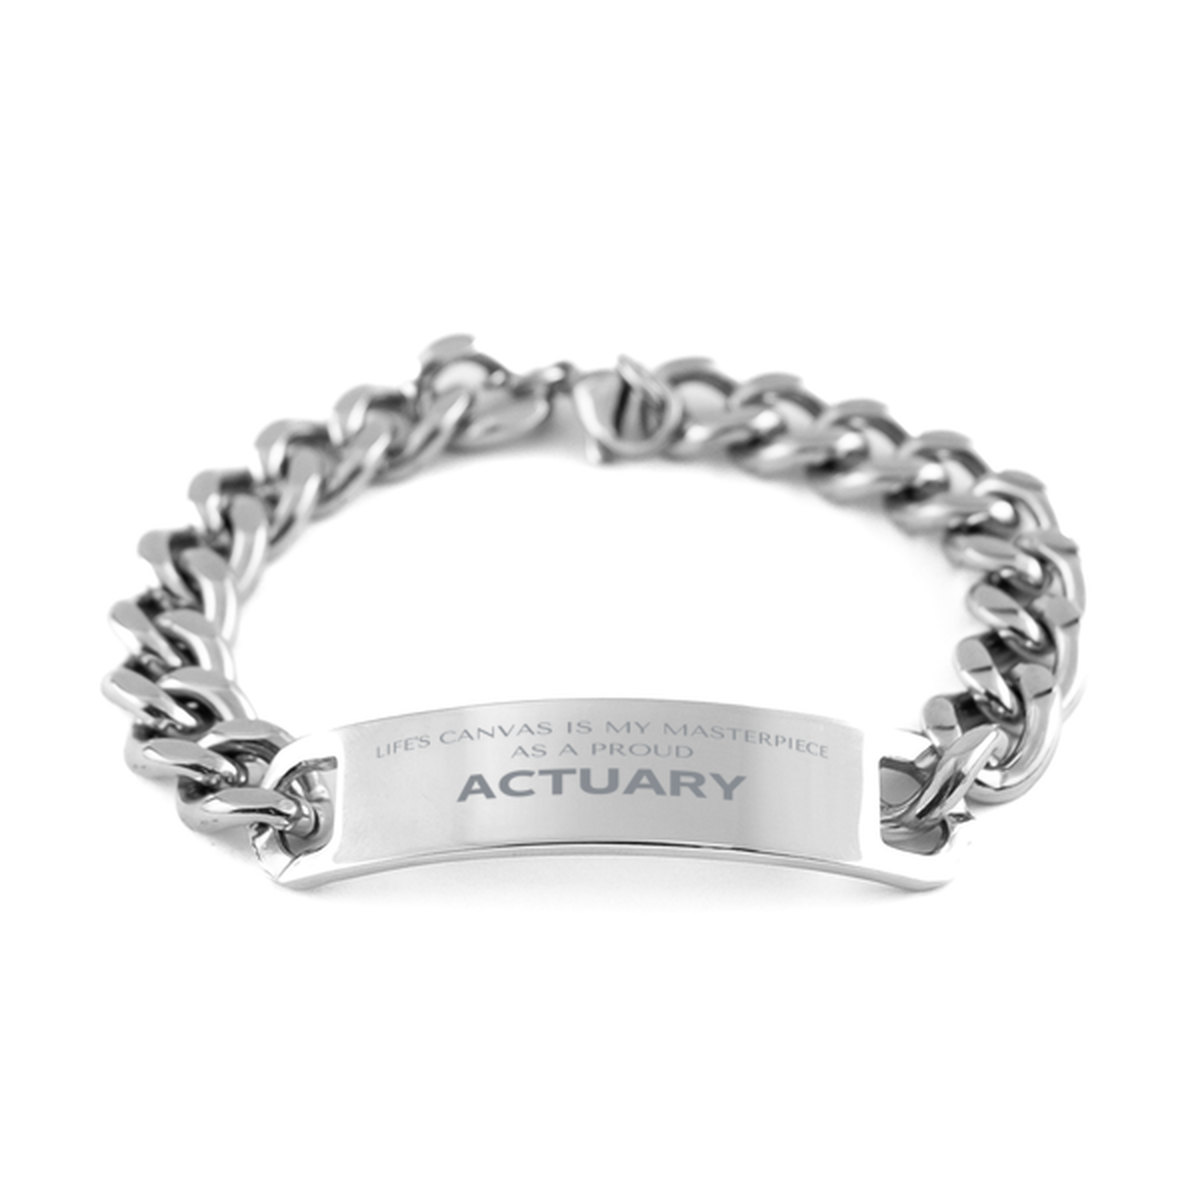 Proud Actuary Gifts, Life's canvas is my masterpiece, Epic Birthday Christmas Unique Cuban Chain Stainless Steel Bracelet For Actuary, Coworkers, Men, Women, Friends